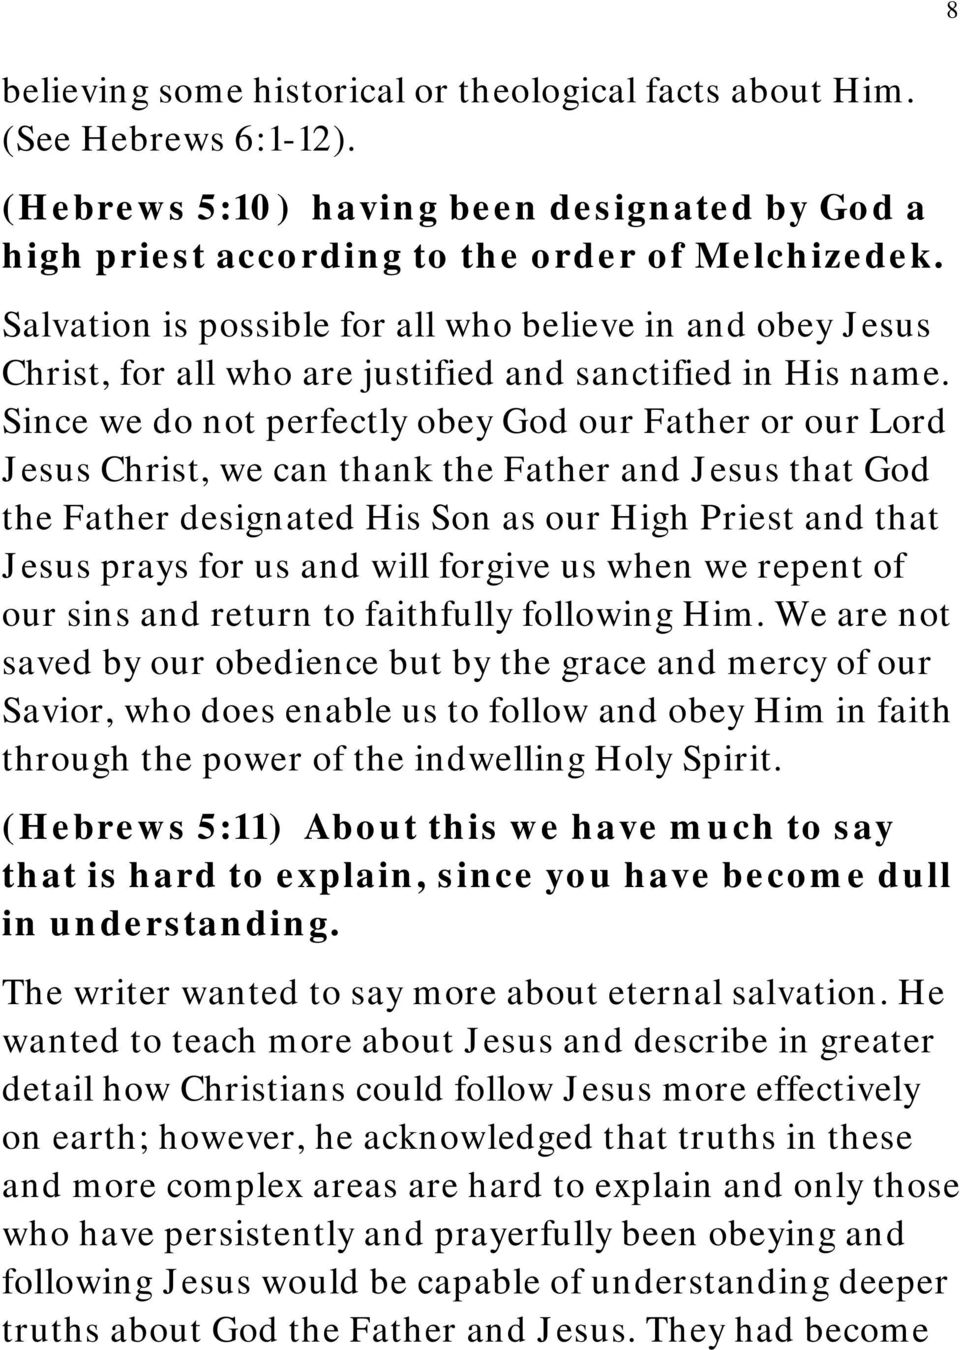 Since we do not perfectly obey God our Father or our Lord Jesus Christ, we can thank the Father and Jesus that God the Father designated His Son as our High Priest and that Jesus prays for us and